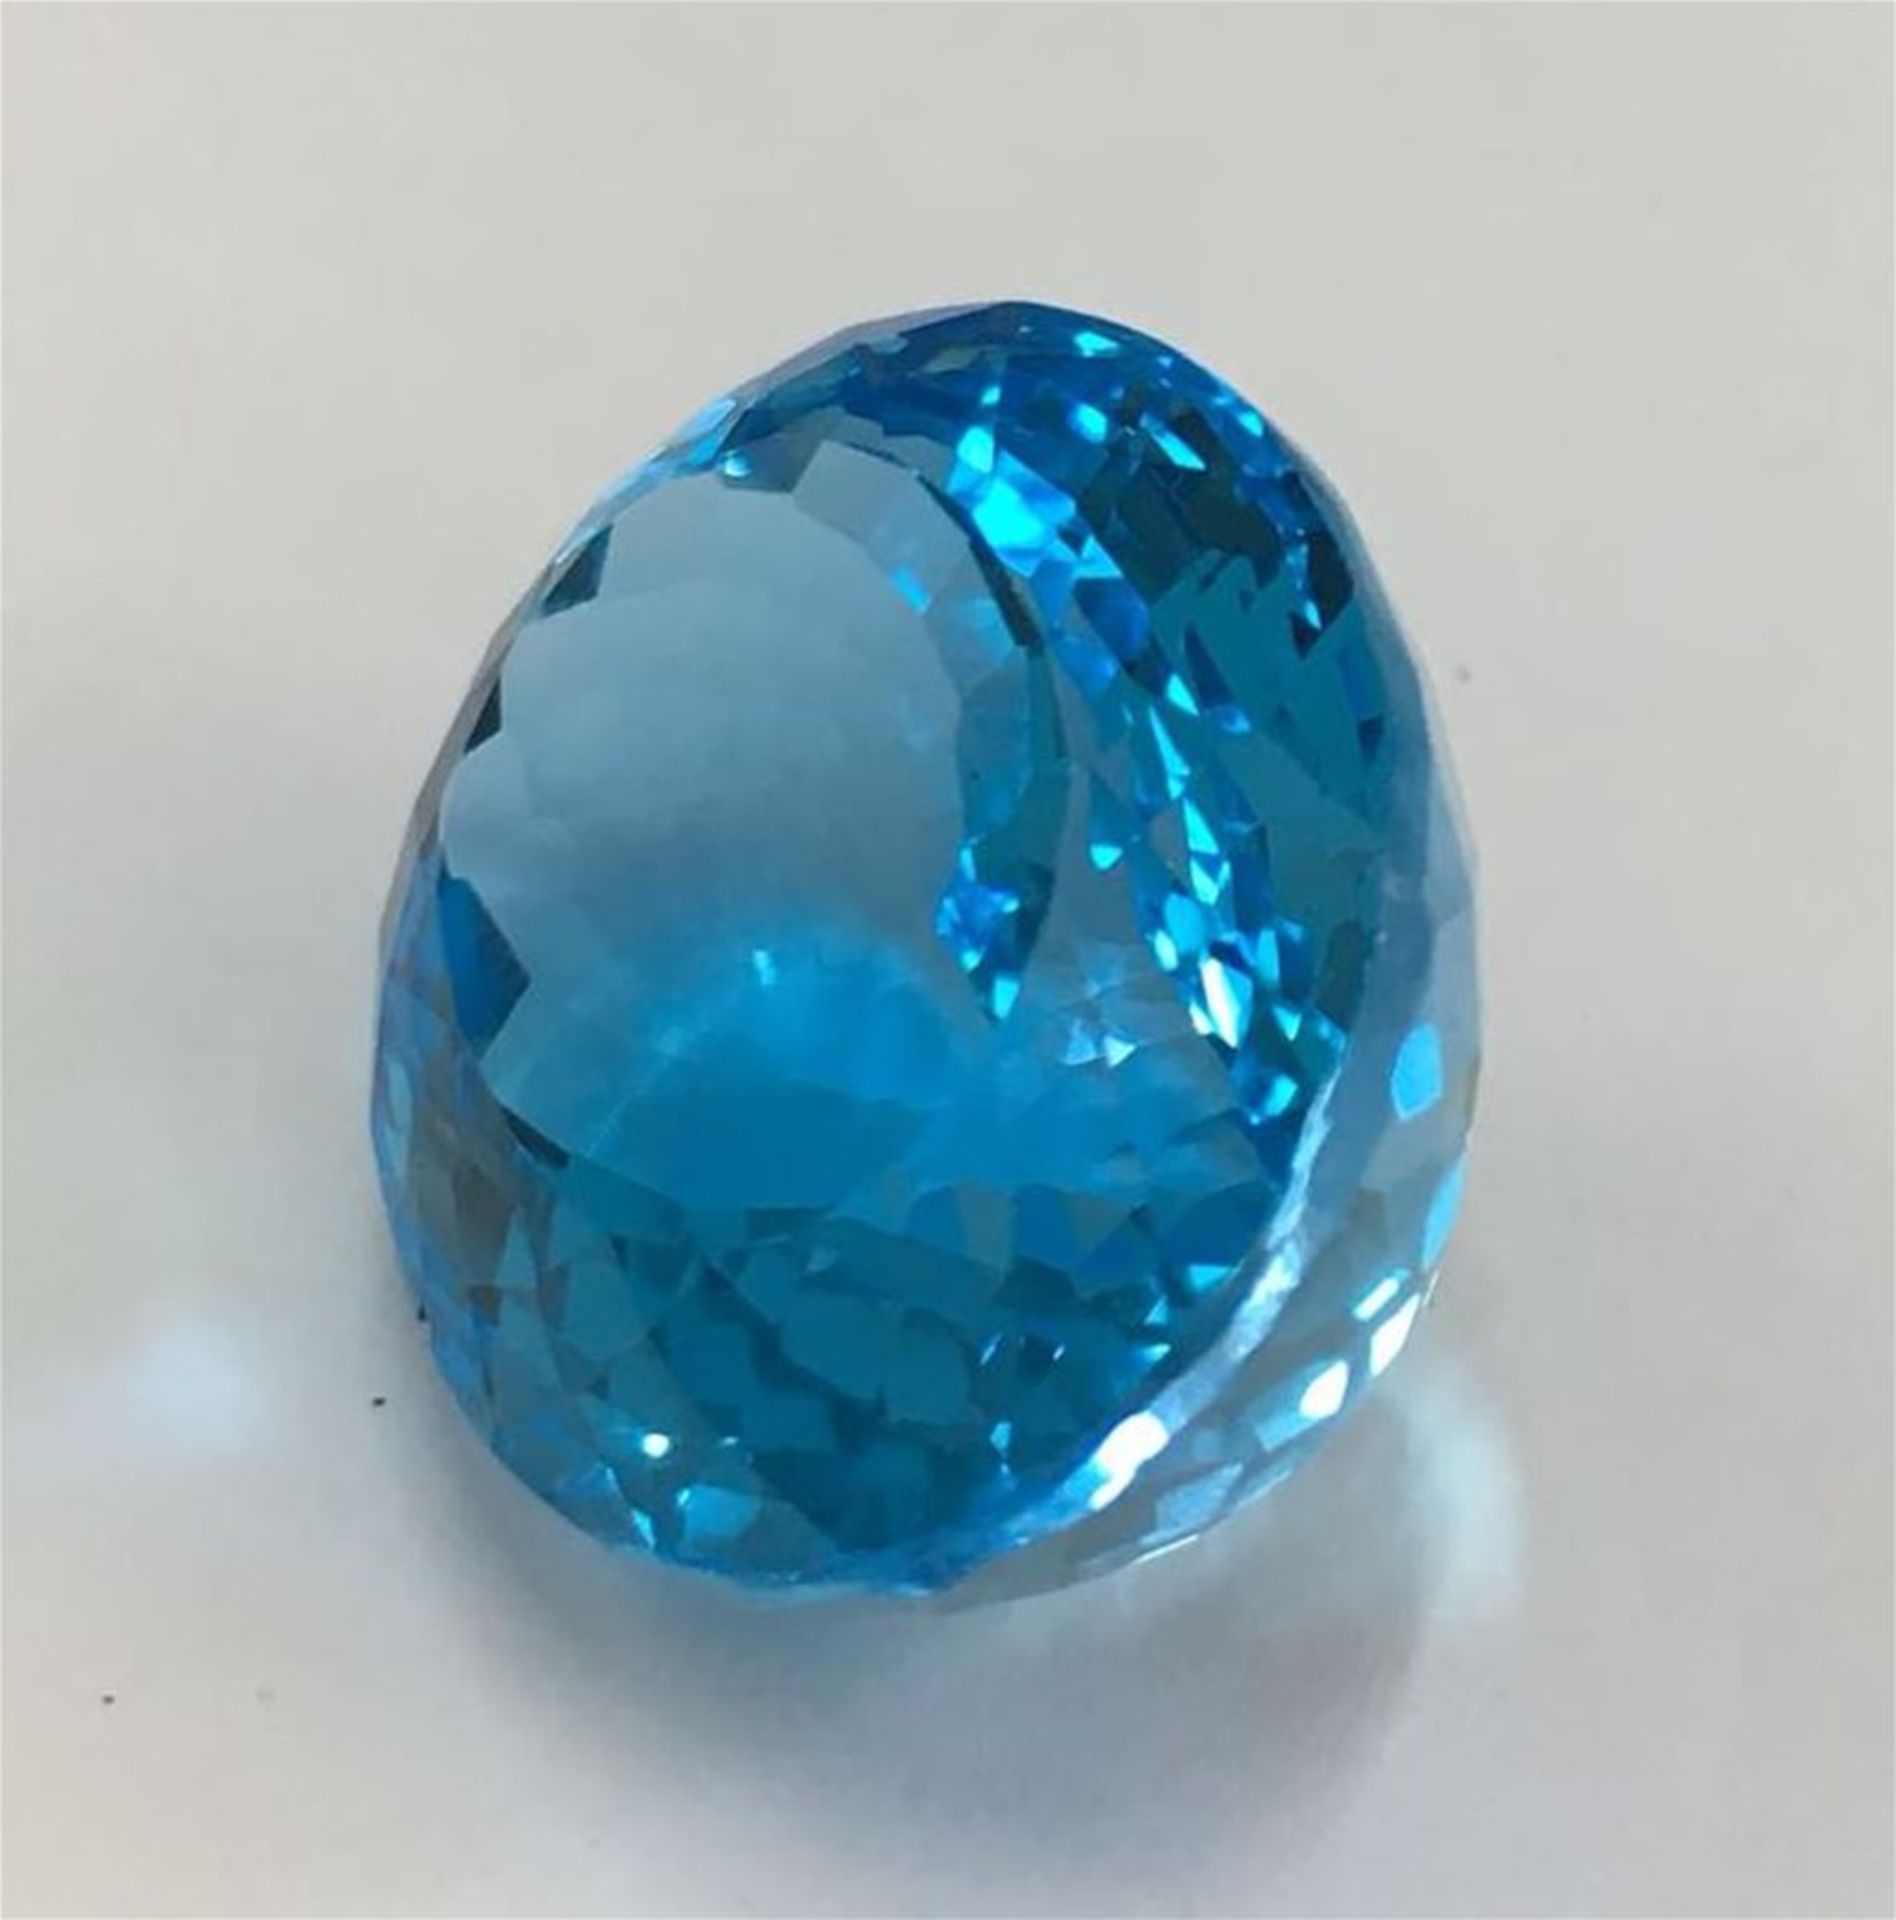 GIA Certified 50.54 ct. Blue Topaz - Image 3 of 7